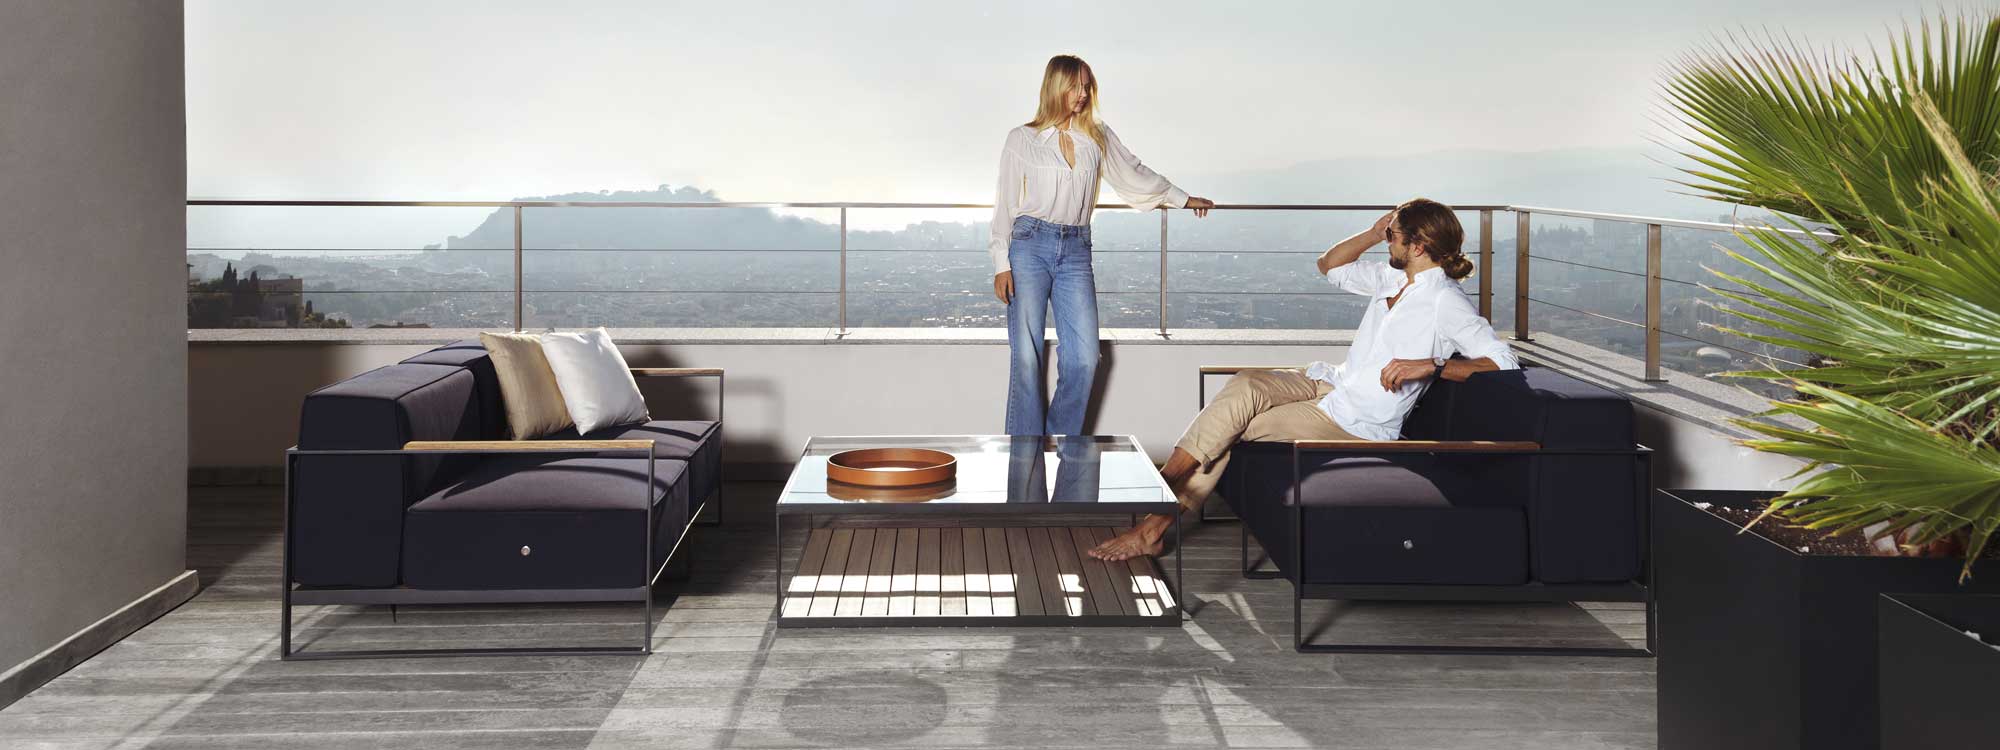 Image of couple relaxing on and around Moore modern garden sofas by Roshults, shown on terrace overlooking hot summer city